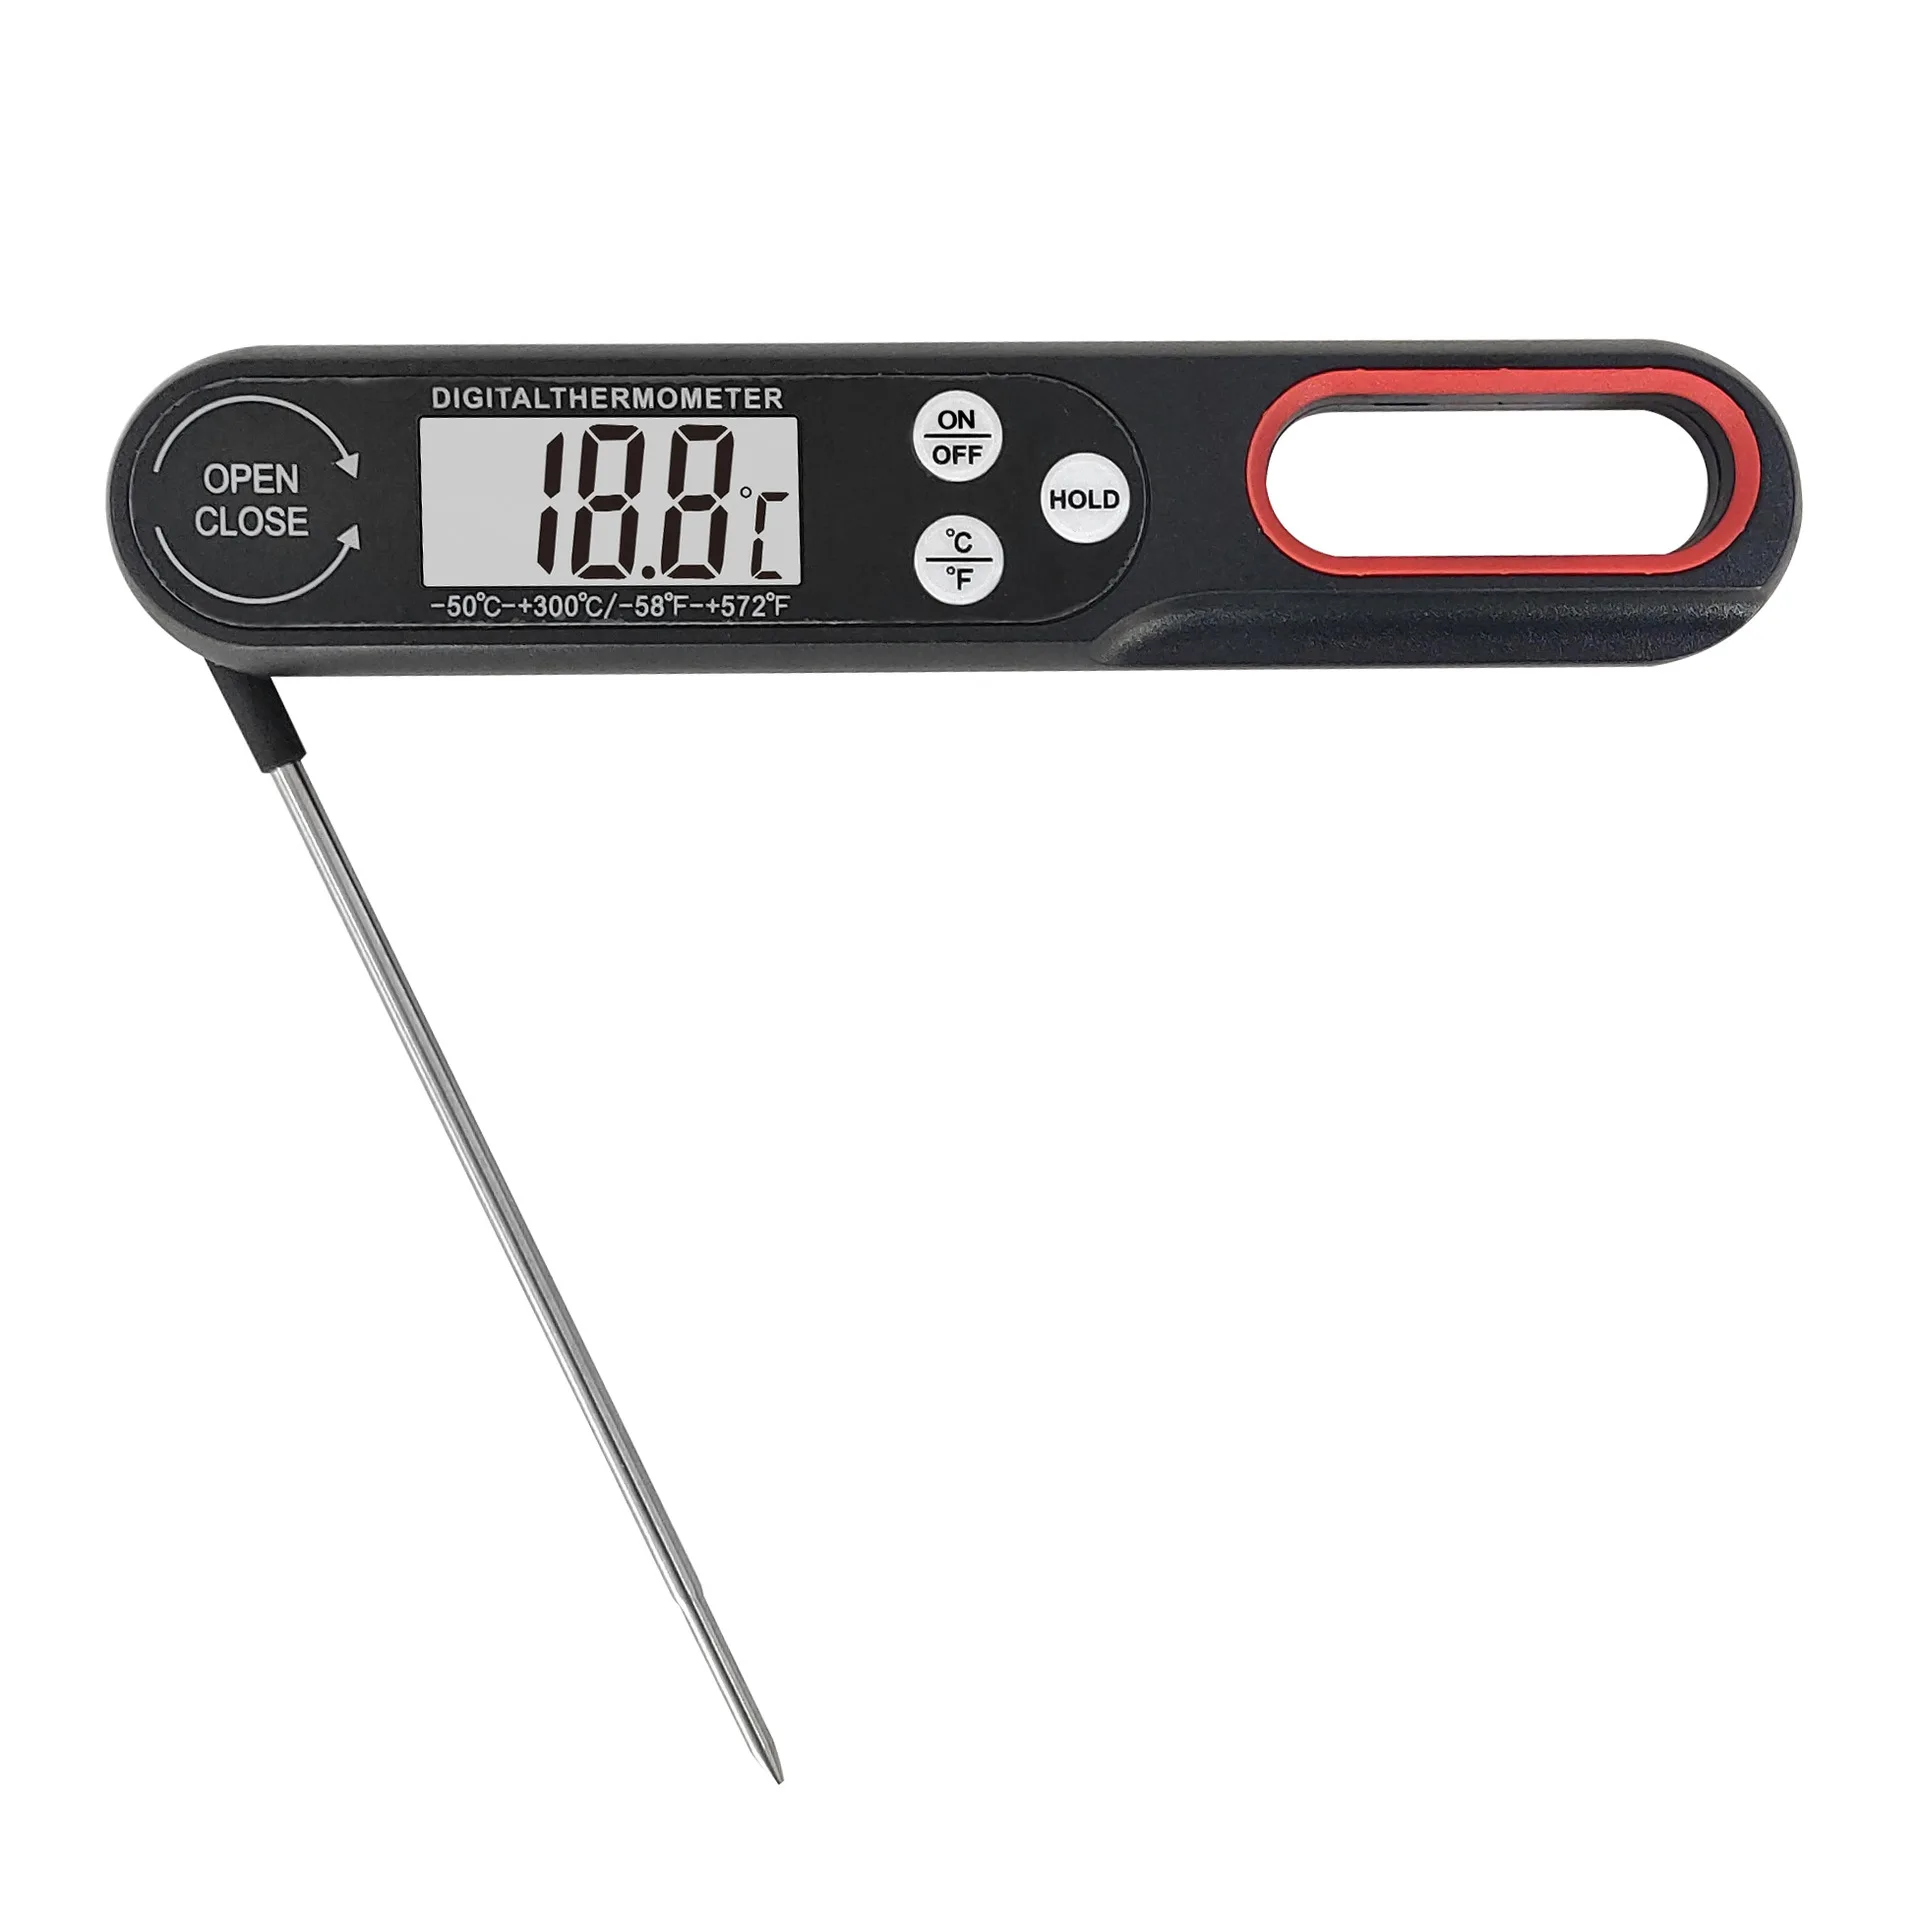 Home Digital Meat Thermometer Kitchen Cooking Food BBQ Probe Water Milk Oil Liquid Oven Digital Temperature Sensor Thermocouple